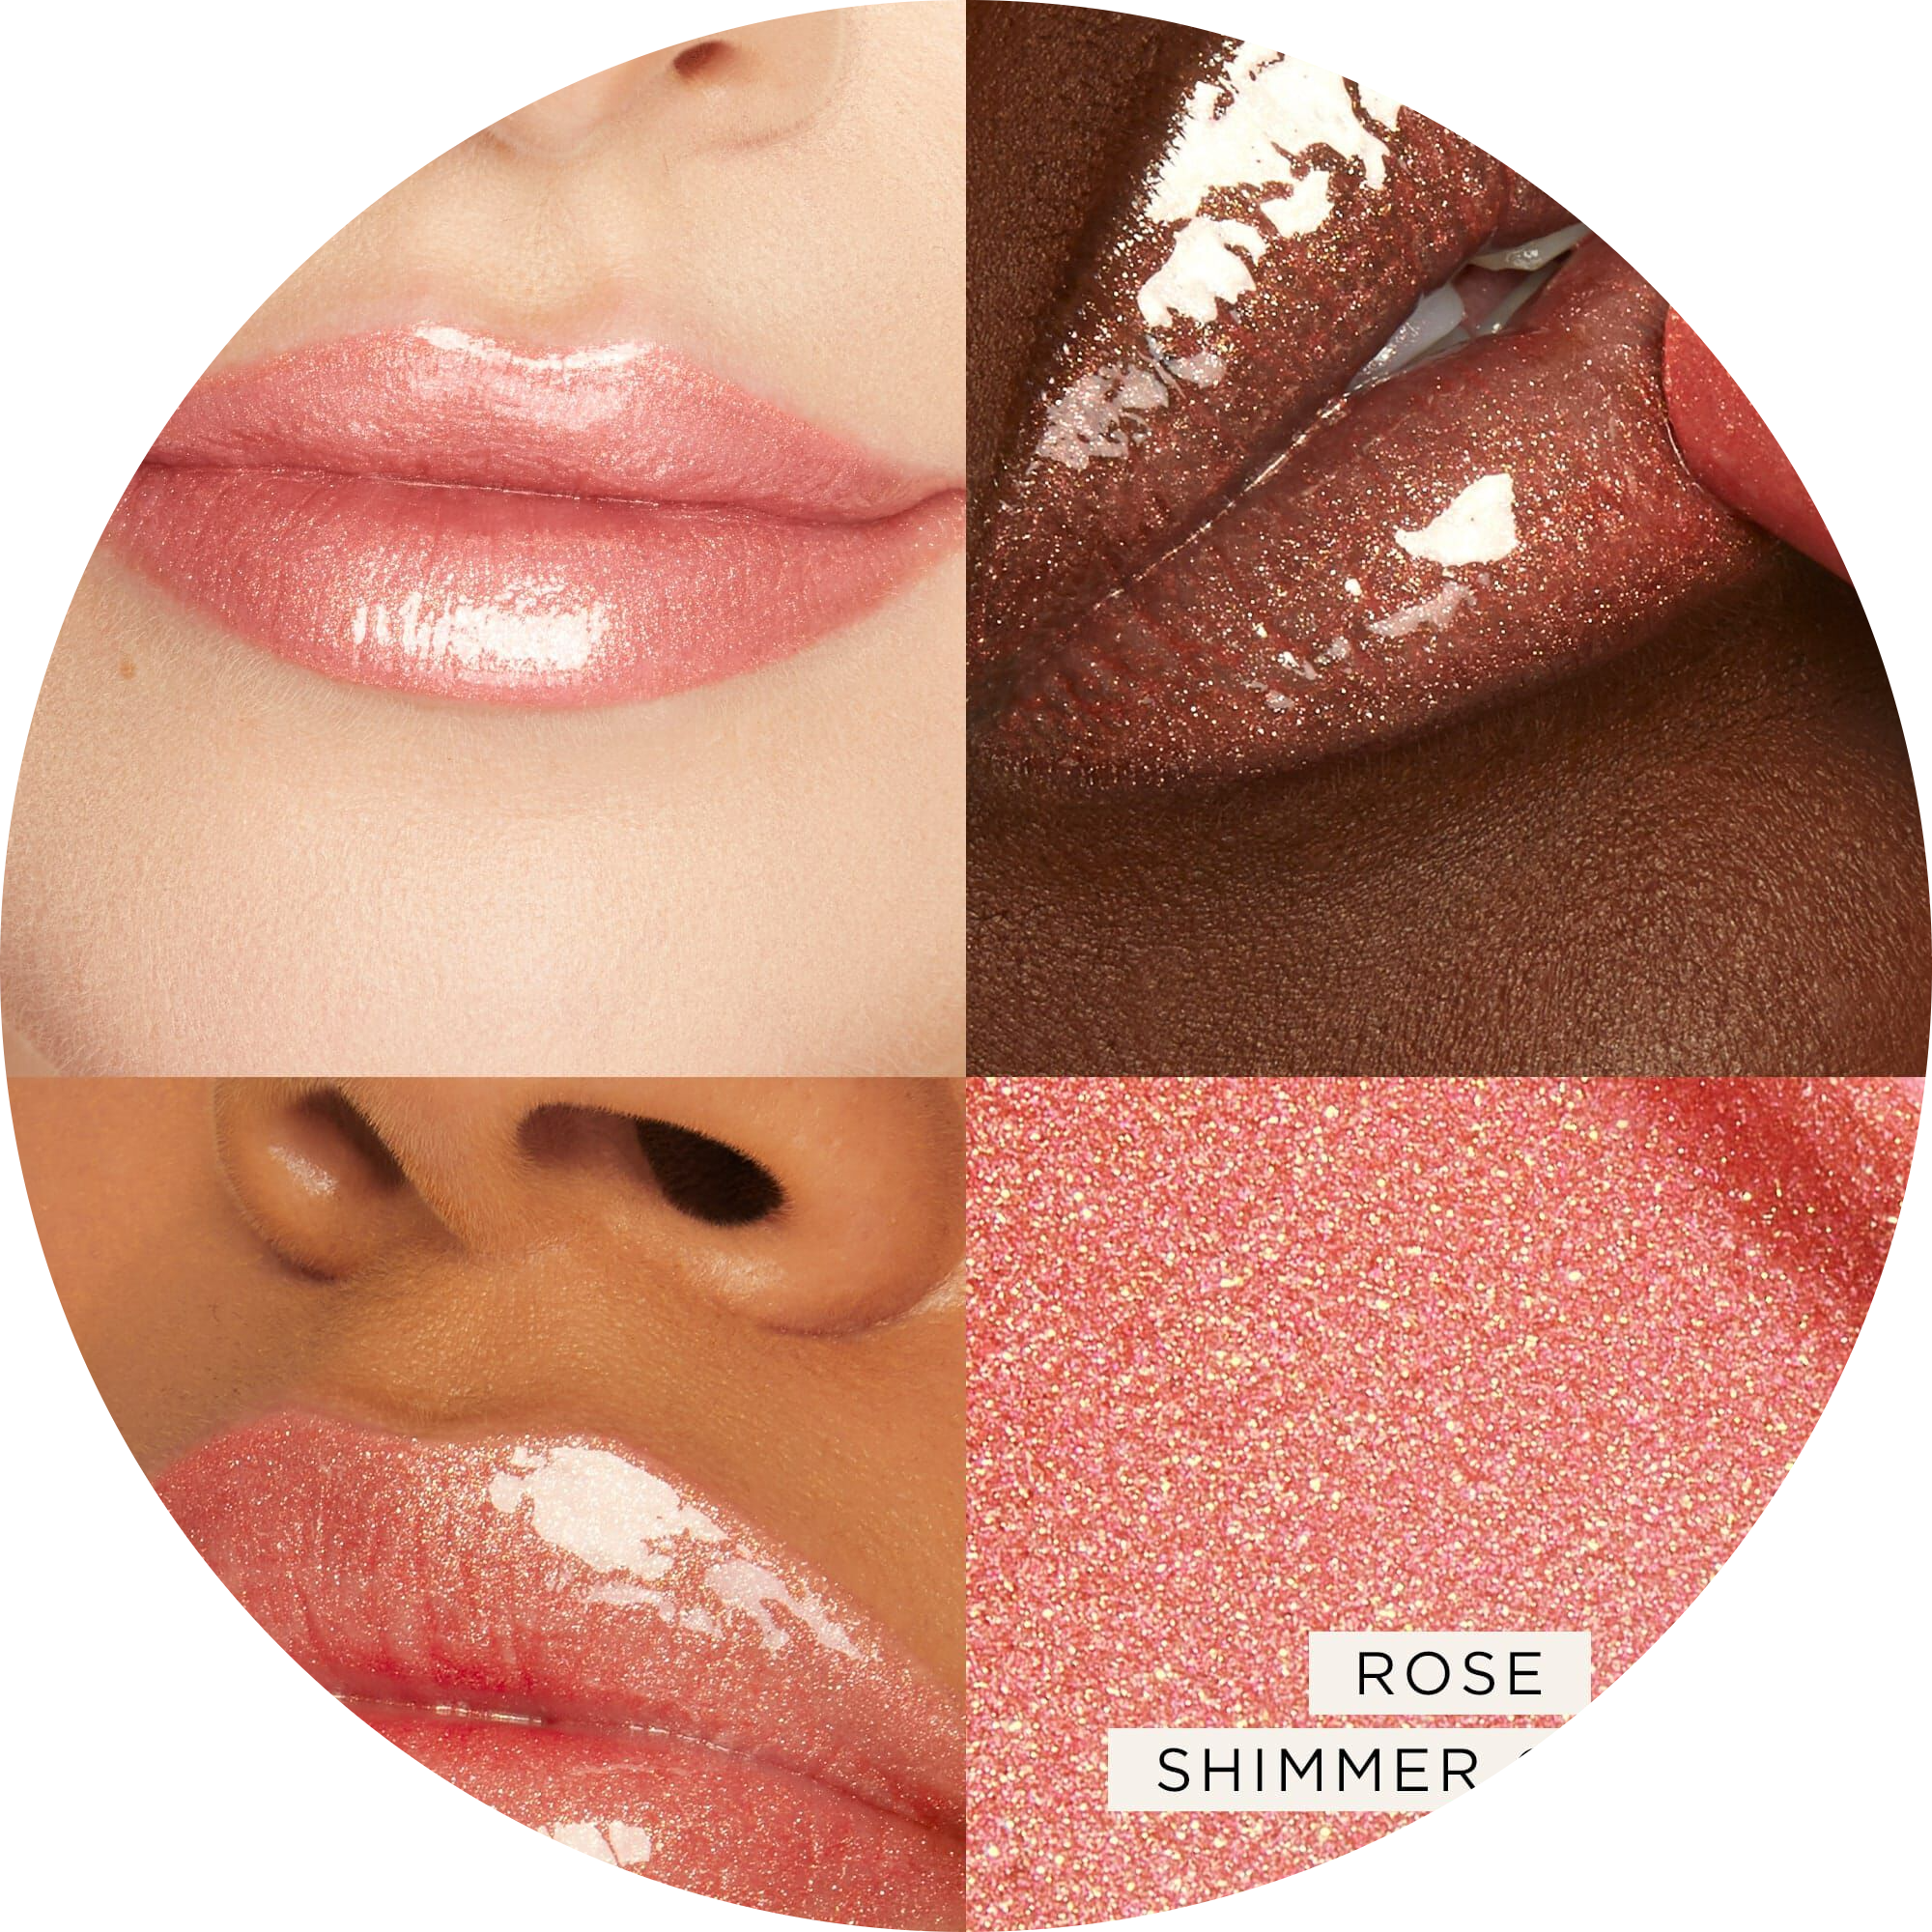 maracuja juicy shimmer glass lip plump NudeFace Chile